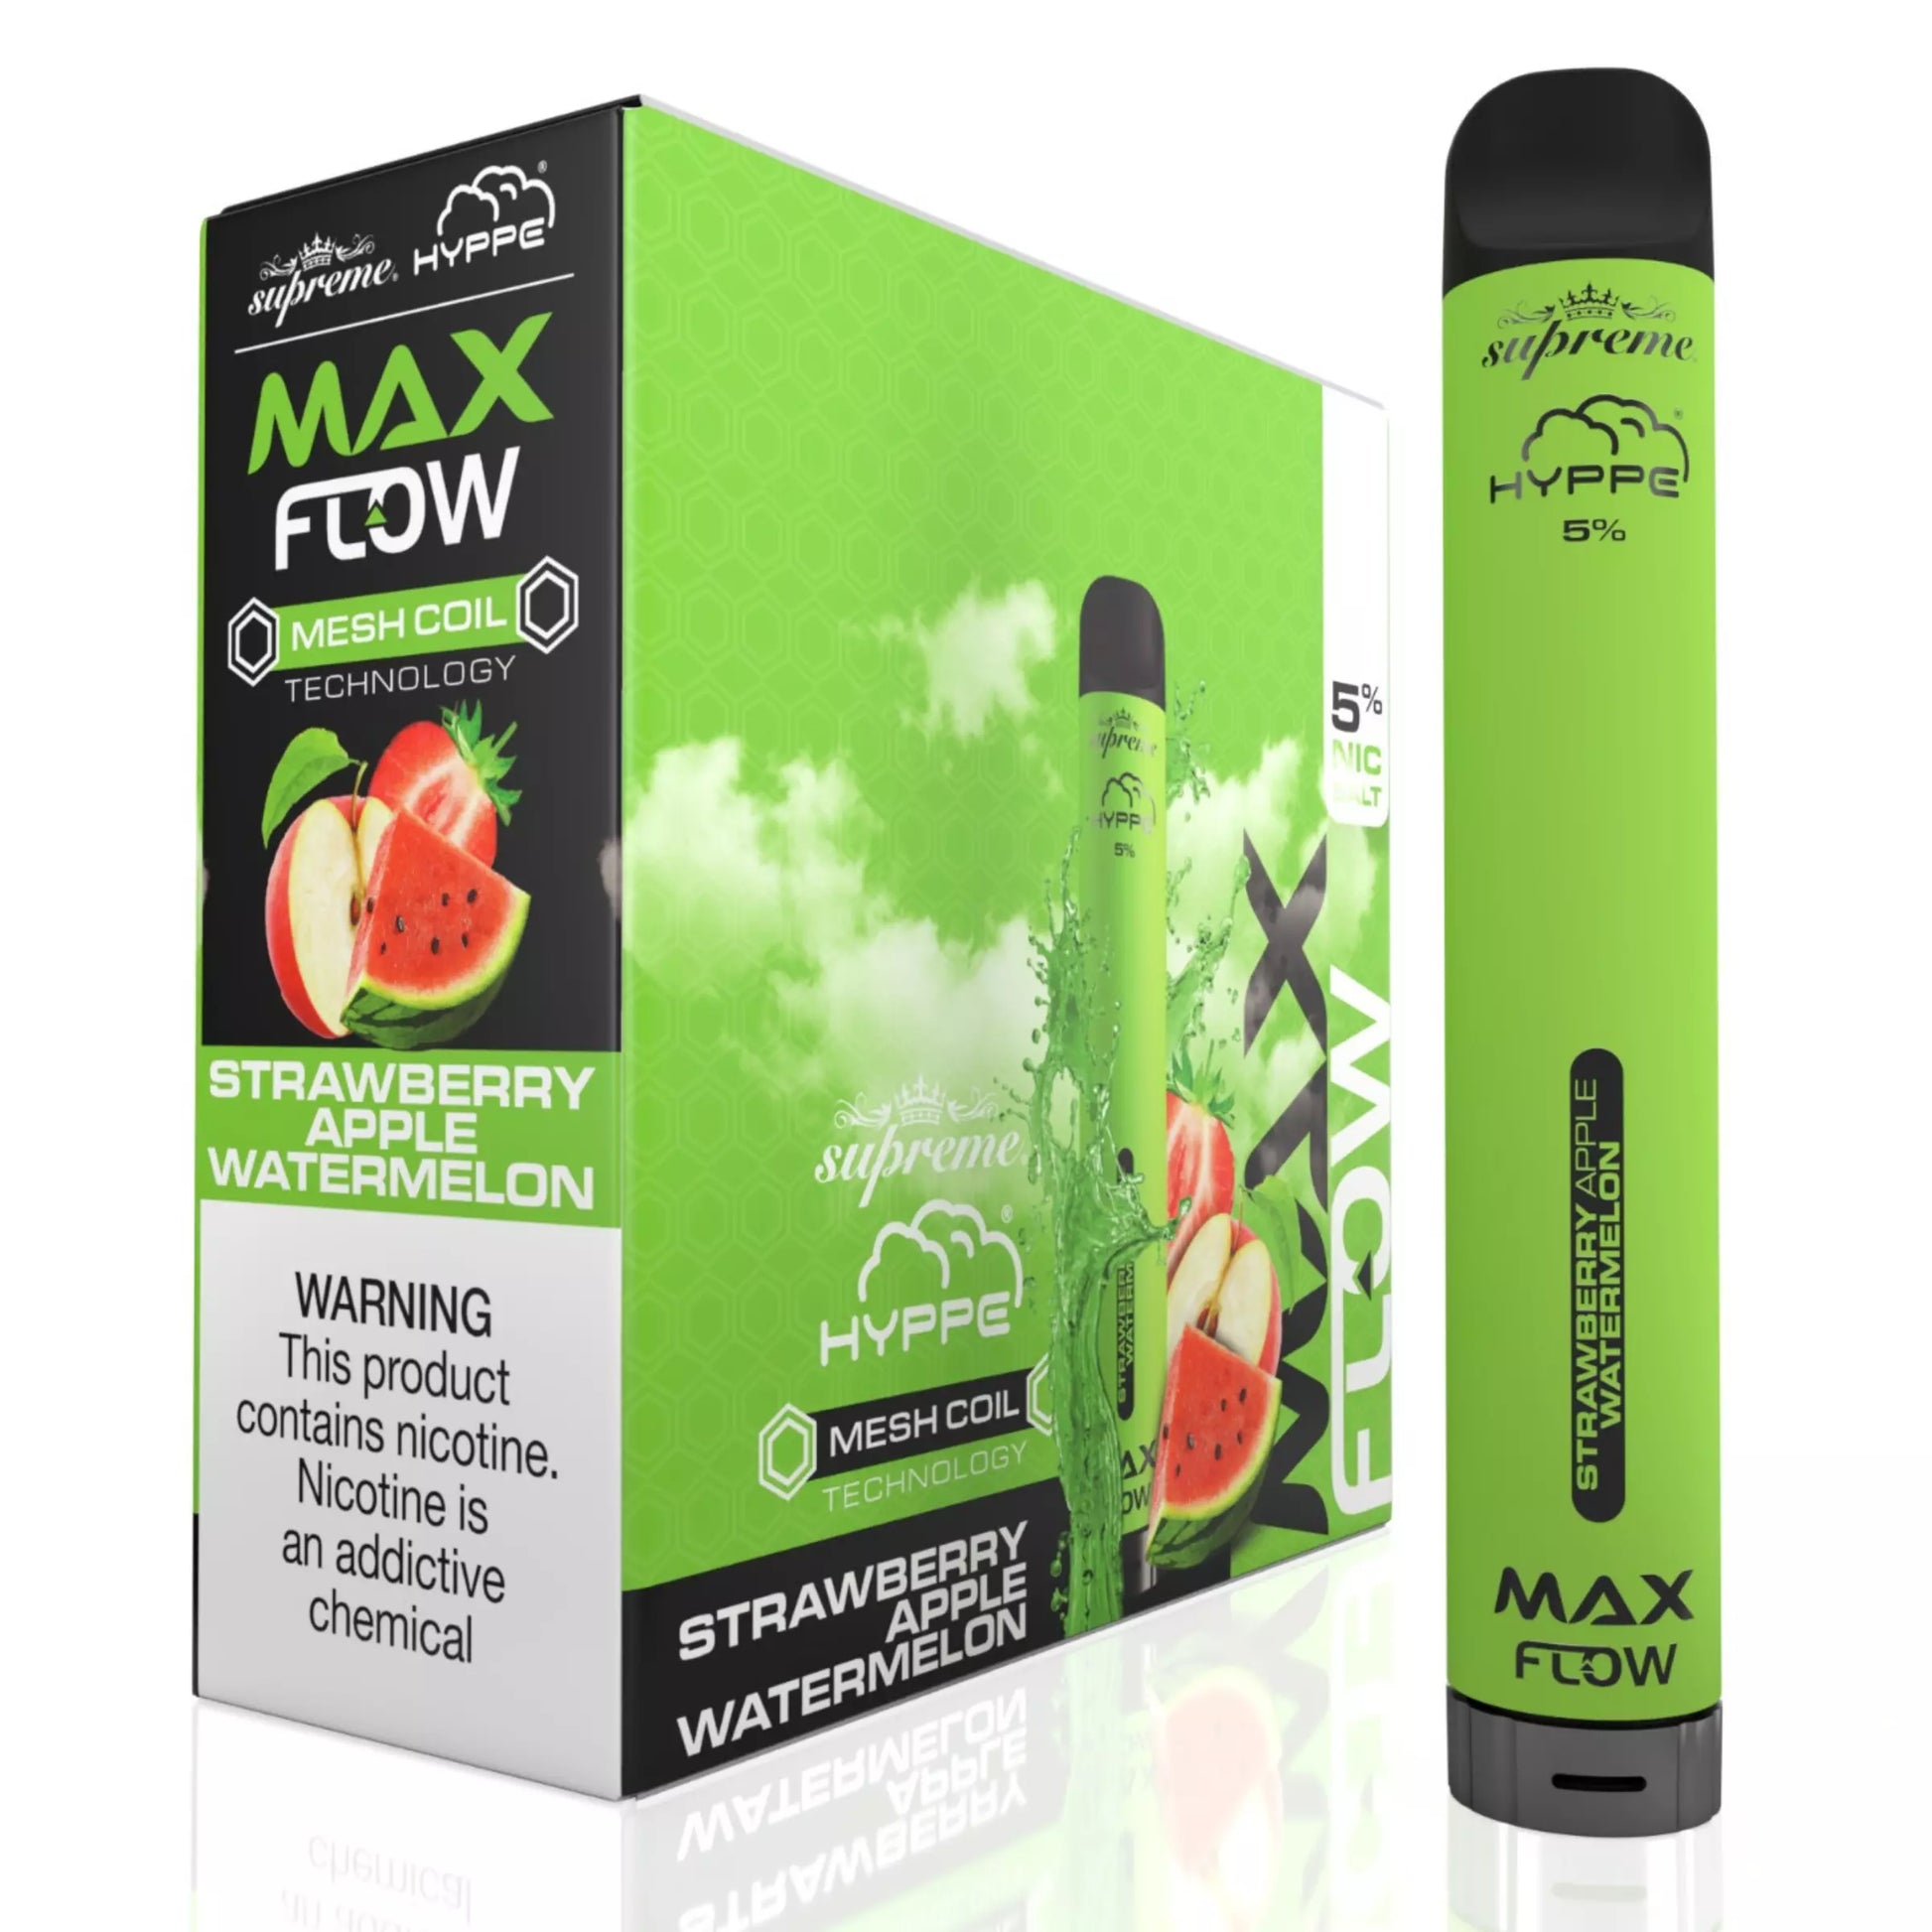 Hyppe Max Flow Disposable 2000 Puffs - Strawberry Apple Watermelon